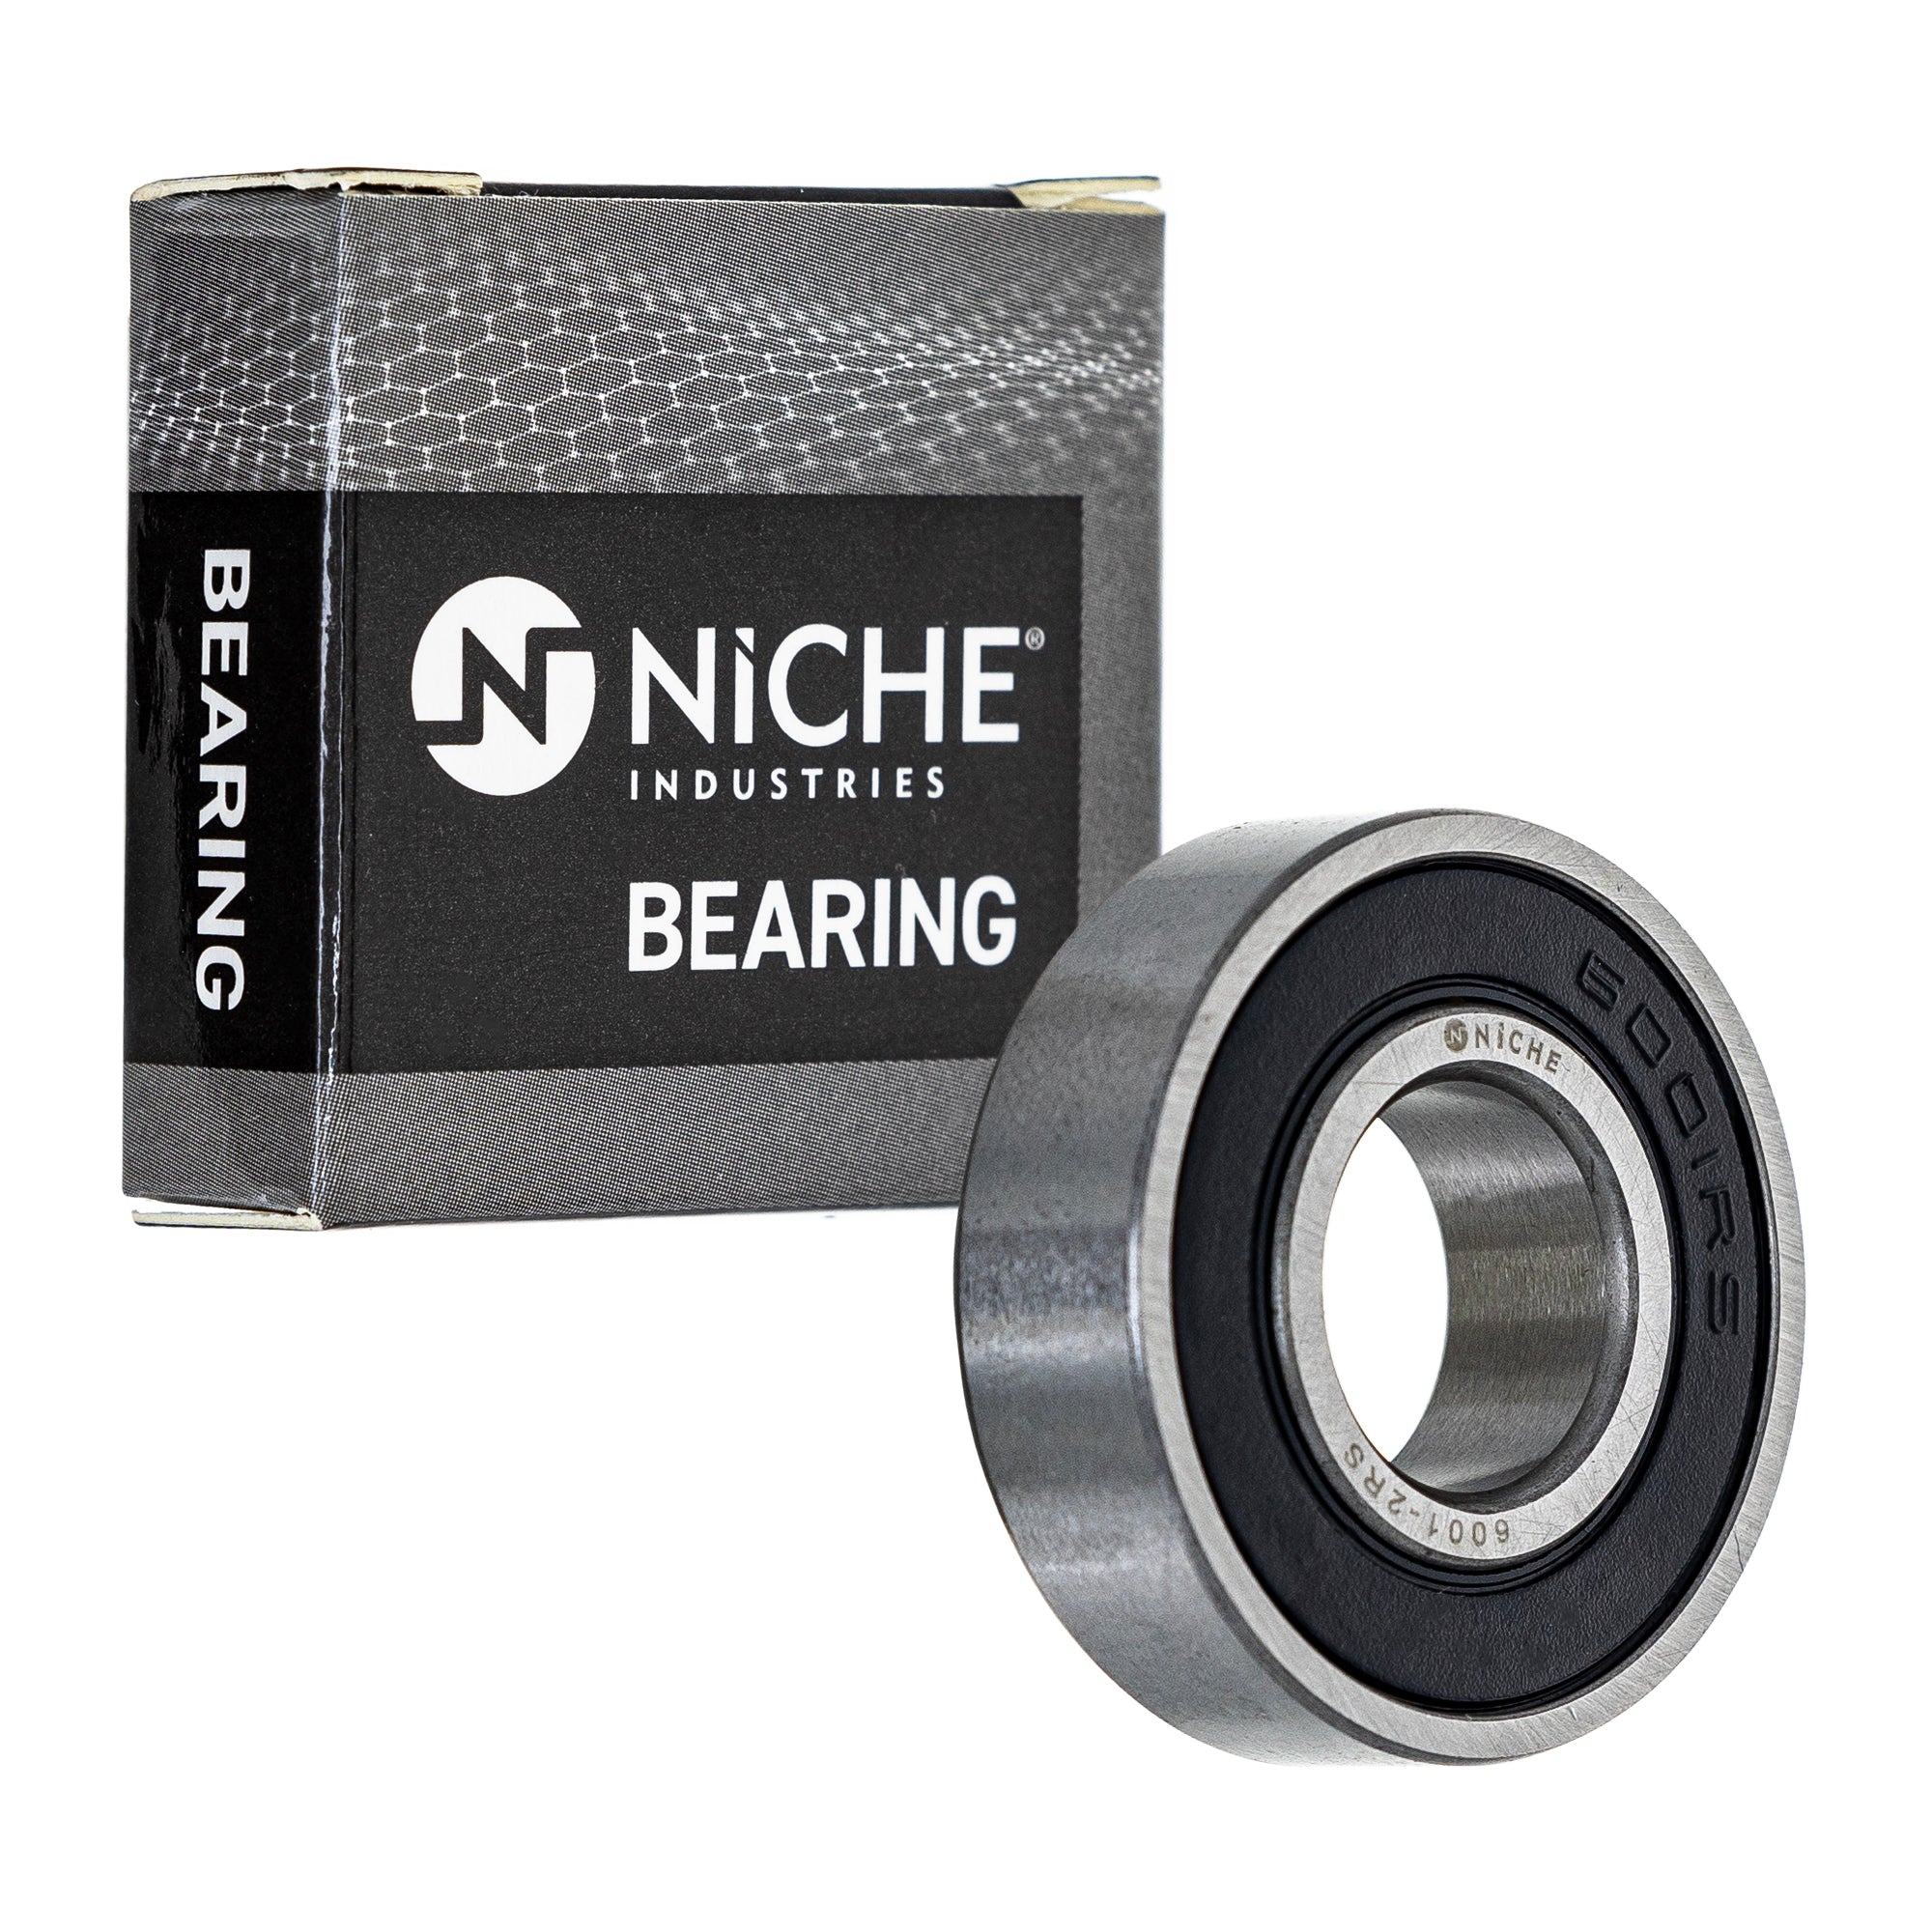 NICHE 519-CBB2257R Bearing 10-Pack for zOTHER YZ80 TTR125LE TTR125